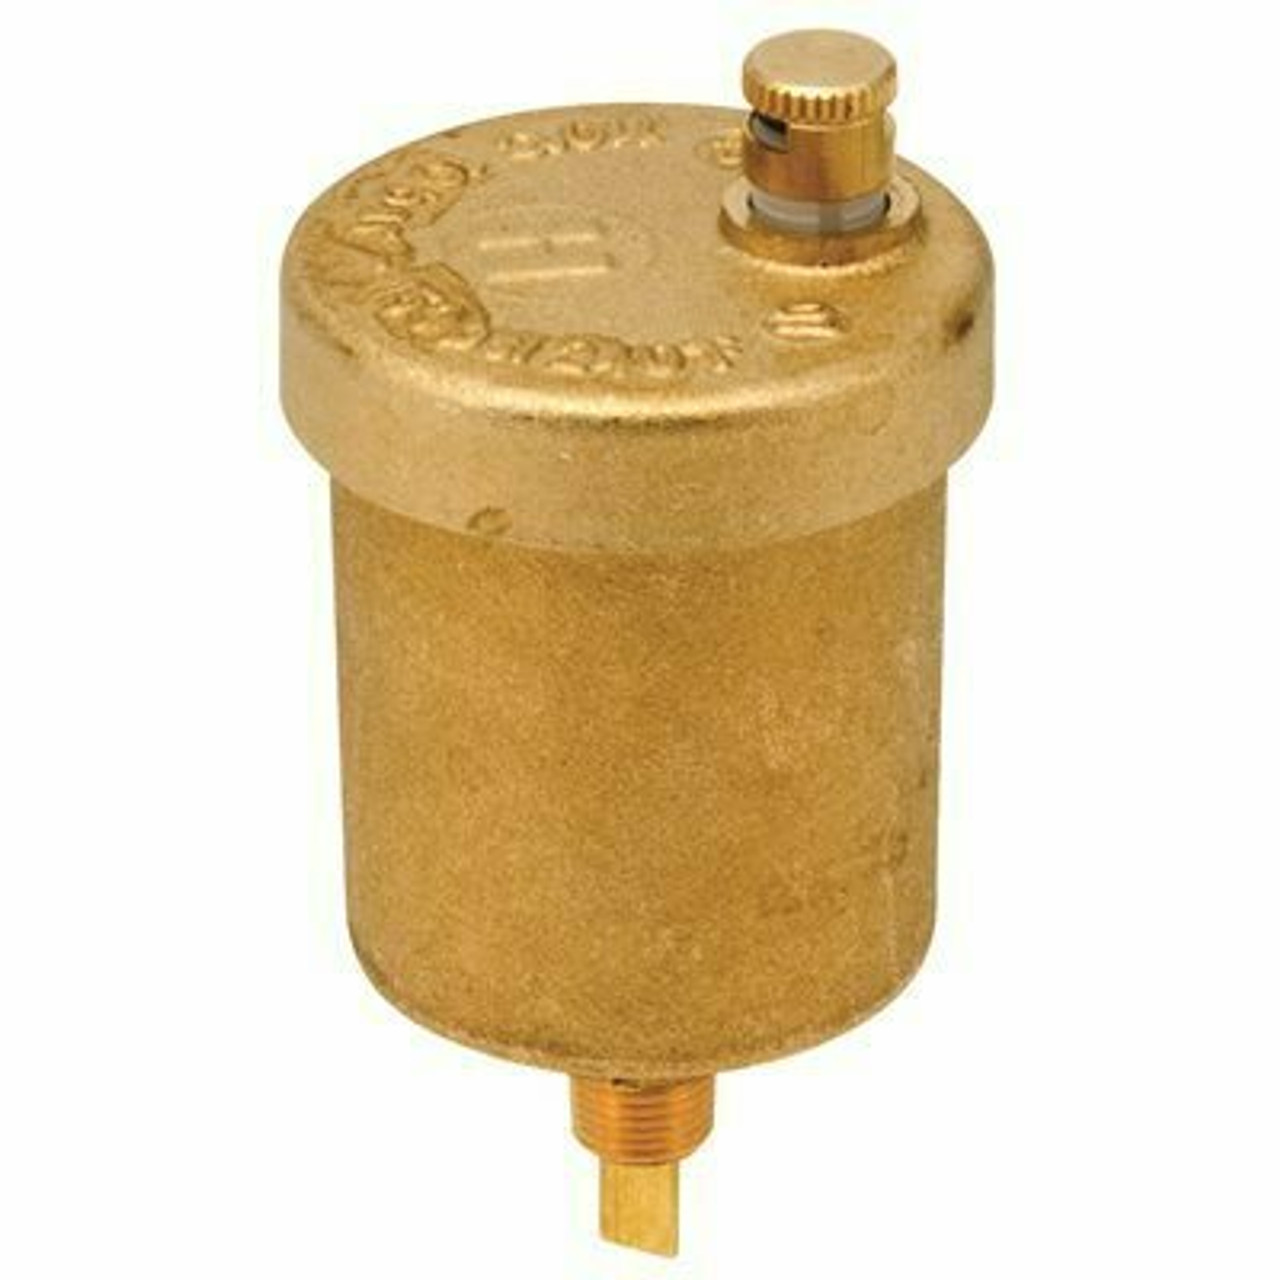 Honeywell 1/8" Npt Goldtop Universal Air Vent Connector Heating/Cooling Systems